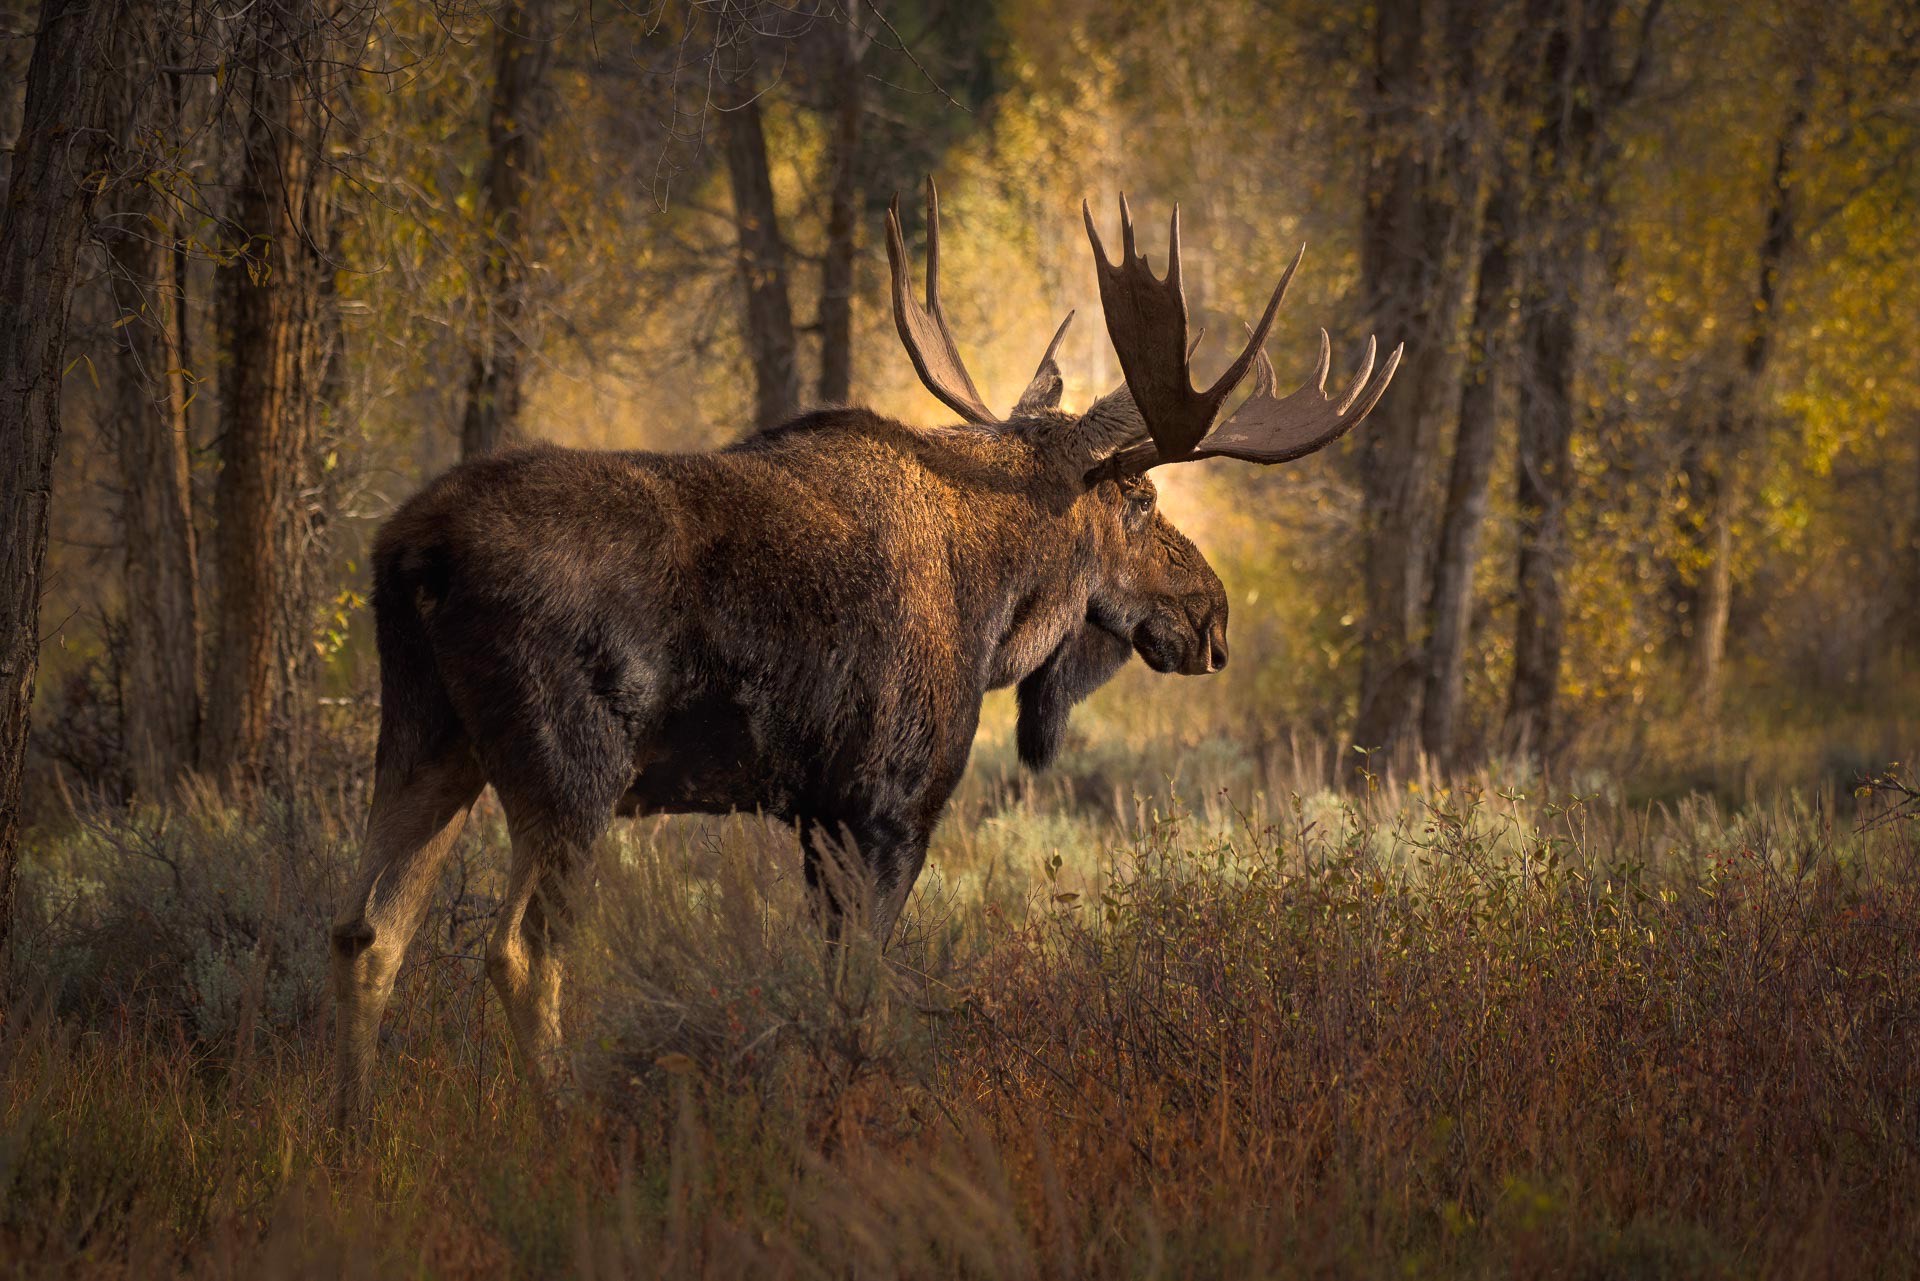 Original Limited Edition Photography Of A Bull Moose In The Forest By Dwight Vasel Available At Gallery Wild